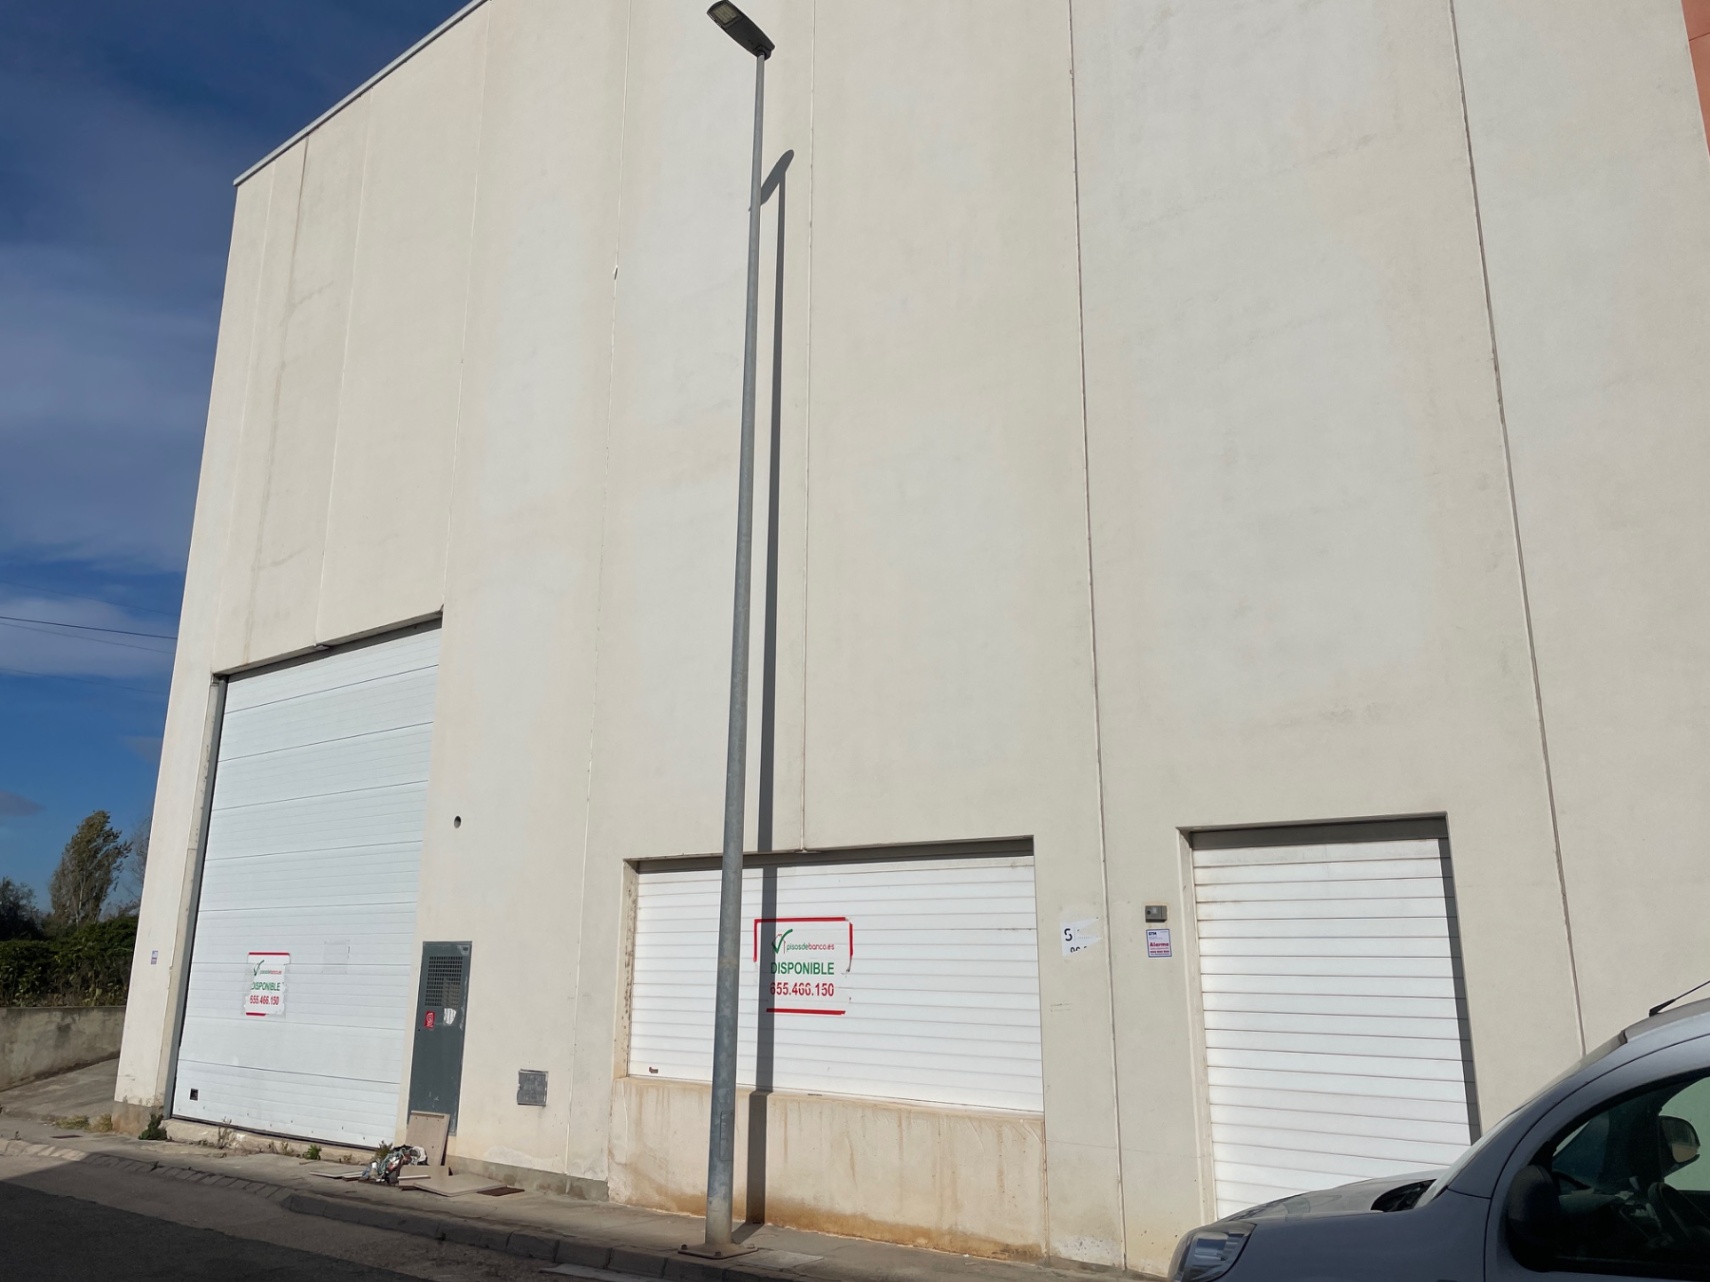 Industrial warehouse for sale